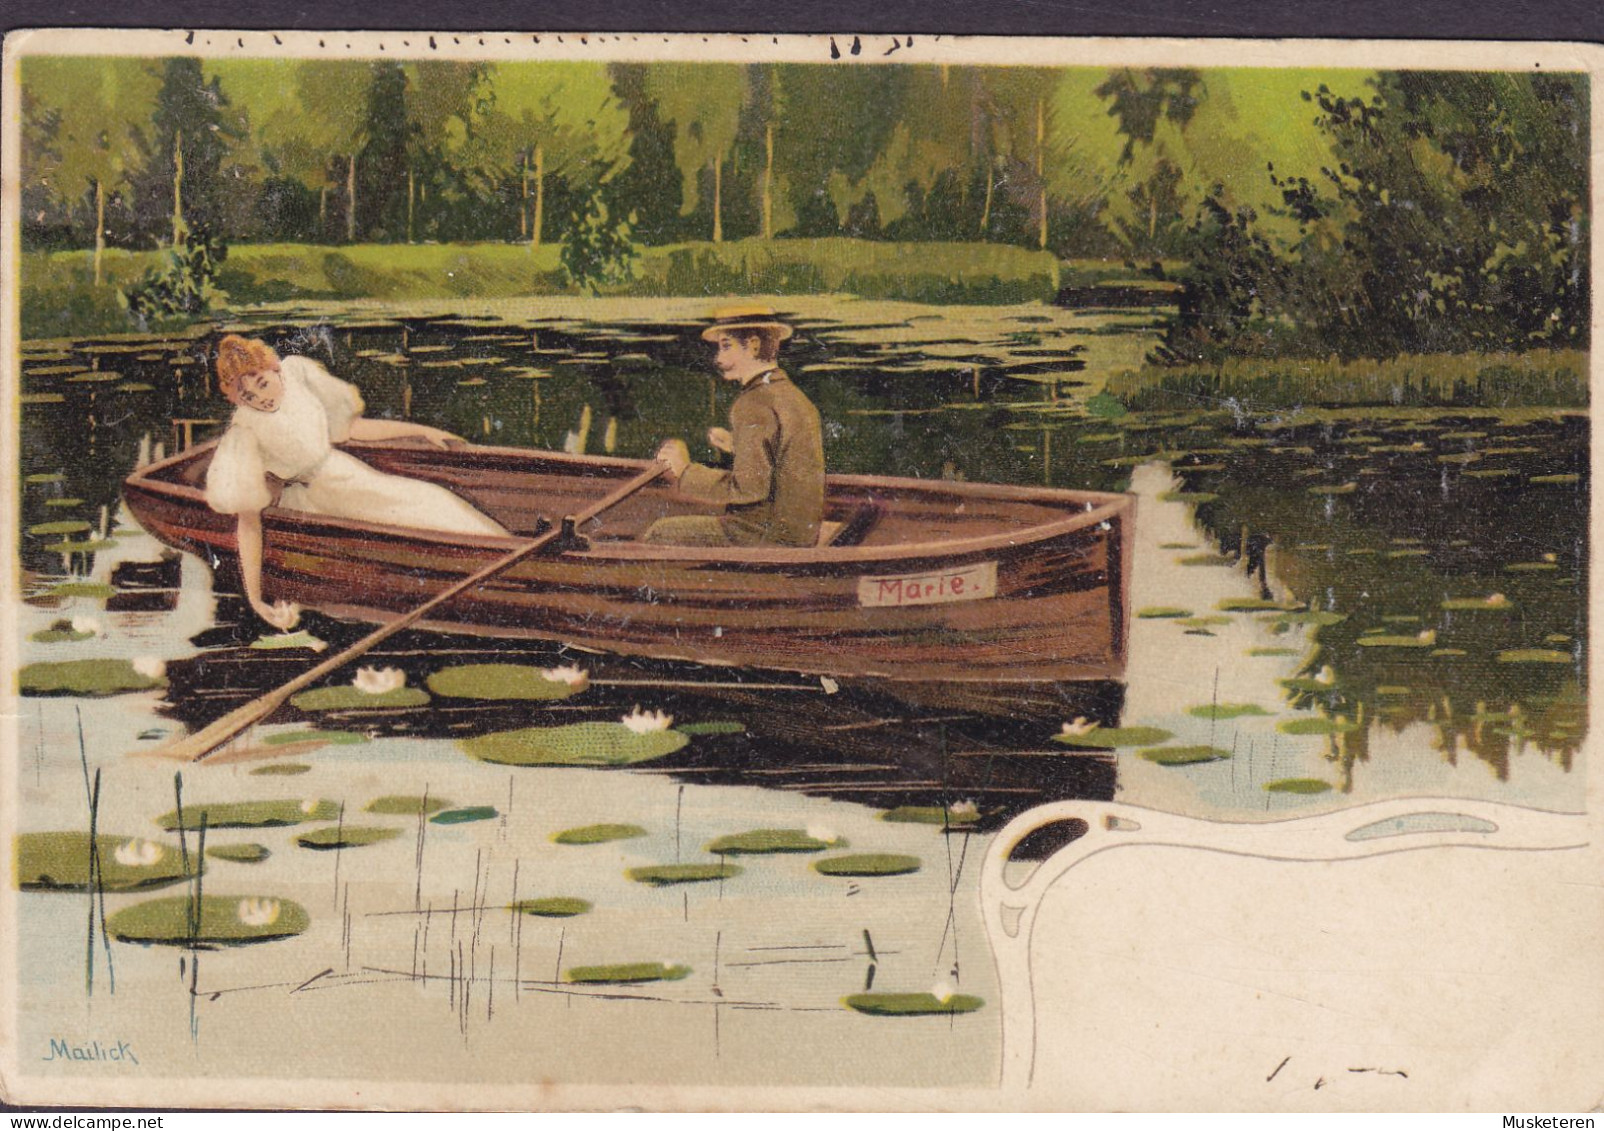 Sweden UPU PPC Alfred Mailick : Couple In A Rowing Boat 'Marie' LINKÖPING 1910 MALMSTATT Oskar II. (2 Scans) - Mailick, Alfred